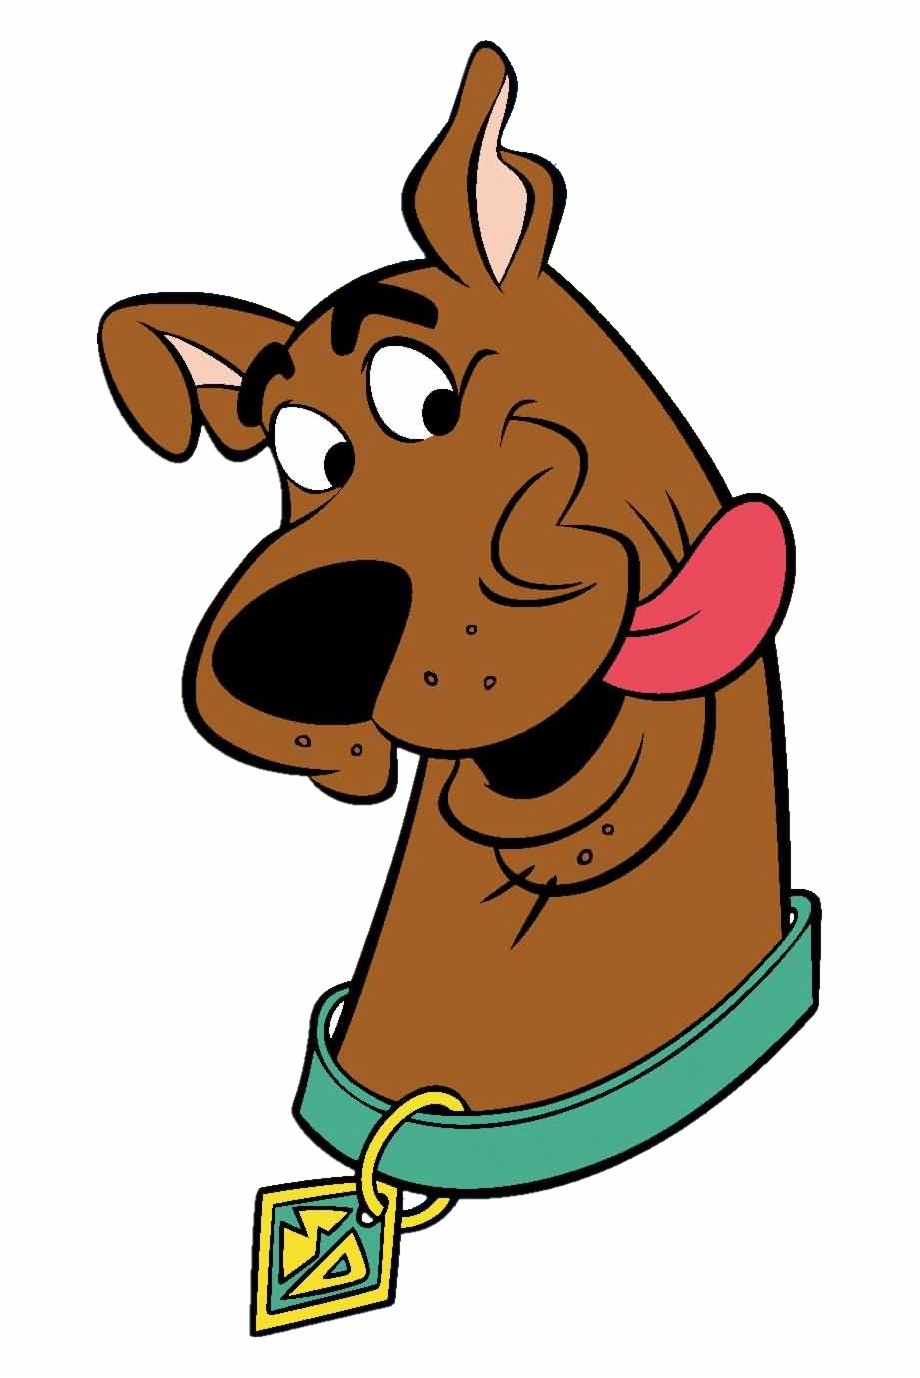 scooby doo clipart cooby